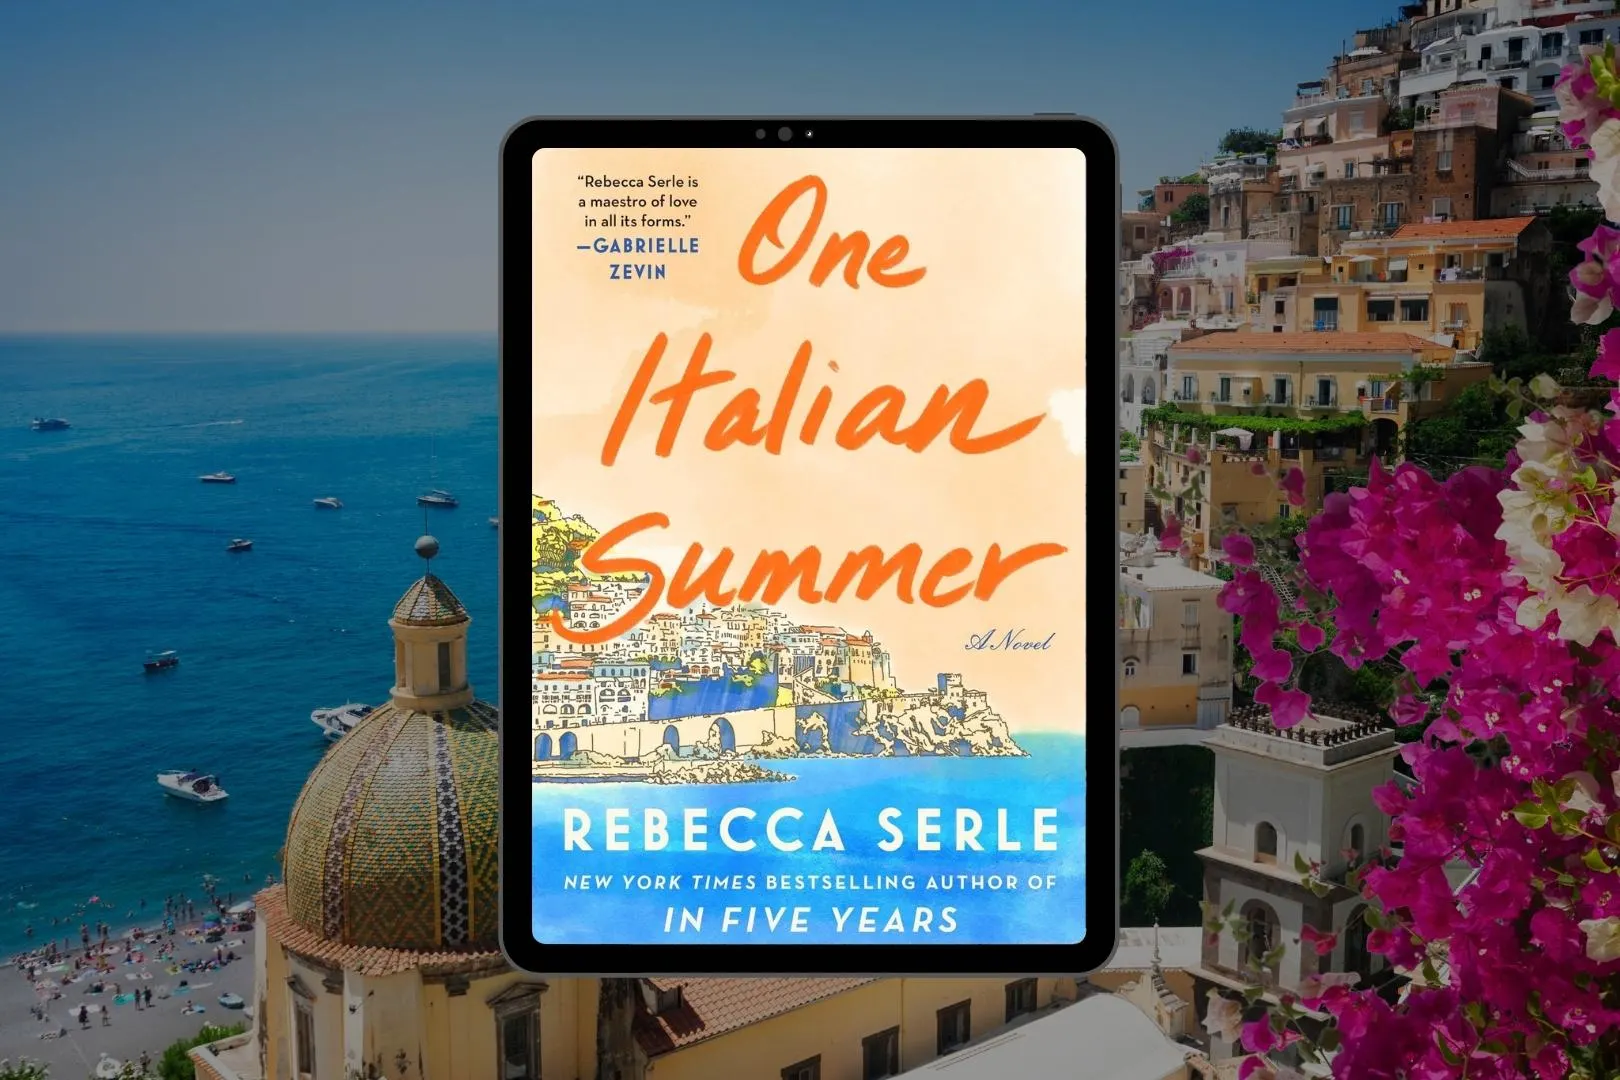 One Italian Summer Book Club Printable - Inspiring Quotes and Reflective  Journal Prompts for Self-Discovery and Empowered Transformation — Firefly  Scout